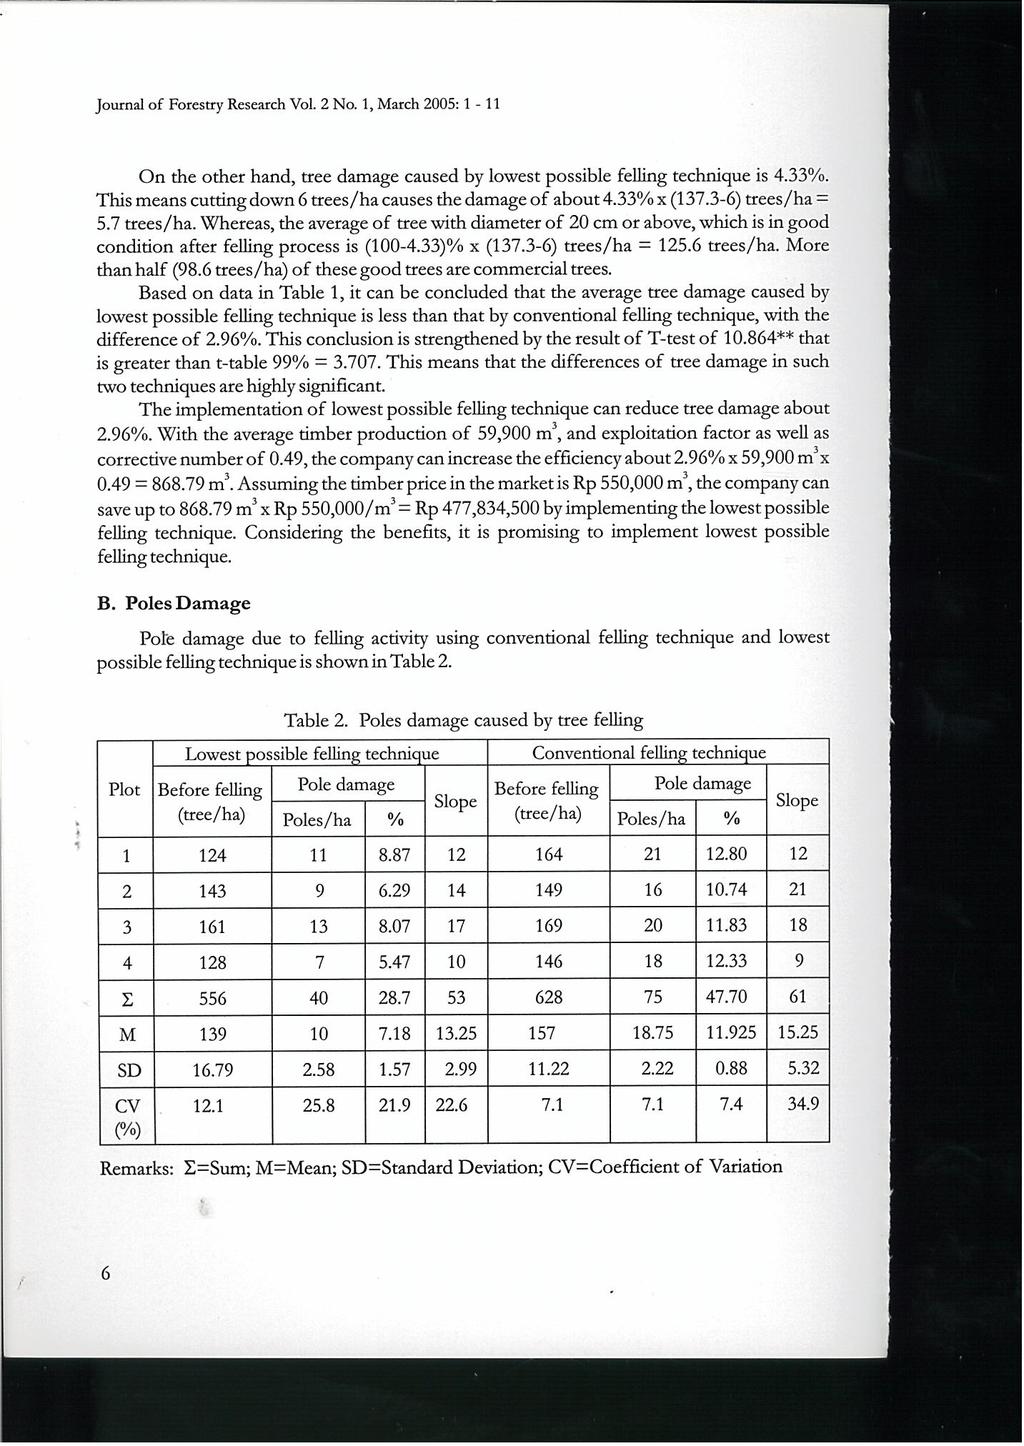 Journal of Forestry Research Vol. 2 No. 1, March 2005: 1-11 On the other hand, tree damage caused by lowest possible felling technique is 4.33%.